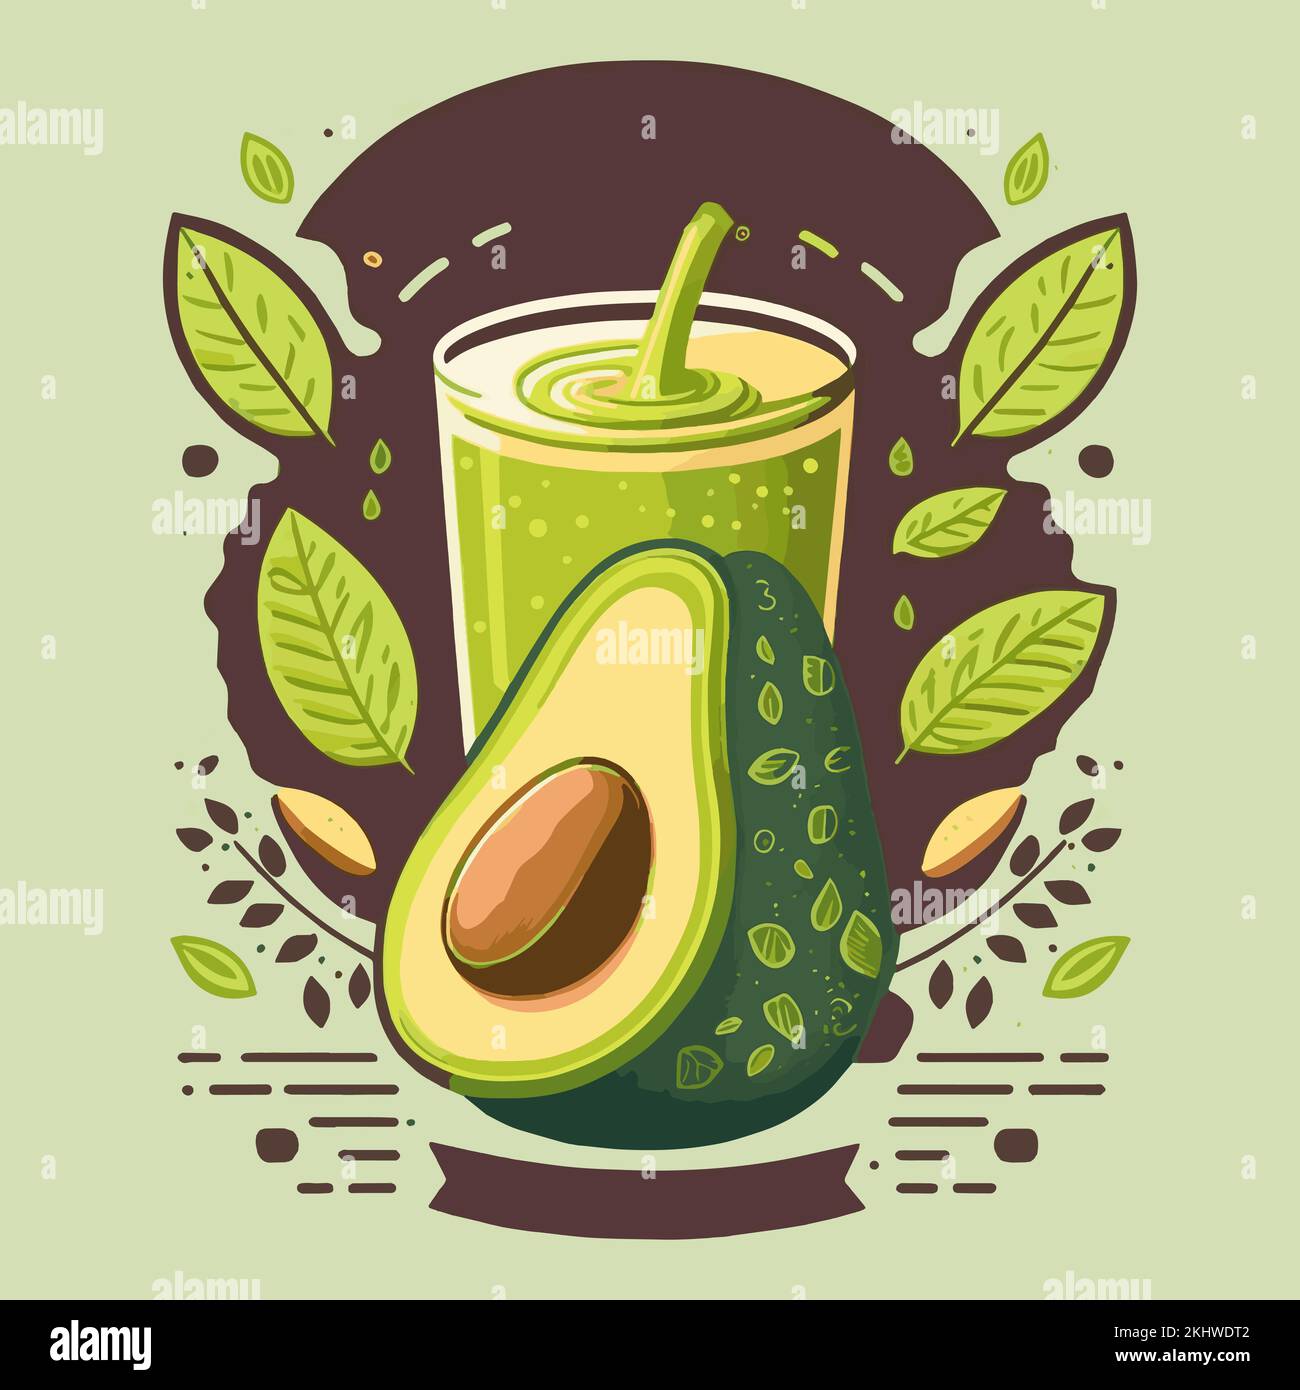 https://c8.alamy.com/comp/2KHWDT2/avocado-smoothie-vegetables-and-fruit-glass-smoothie-mug-with-green-liquid-food-and-drinks-isolated-for-menu-for-healthy-eating-fresh-energetic-2KHWDT2.jpg